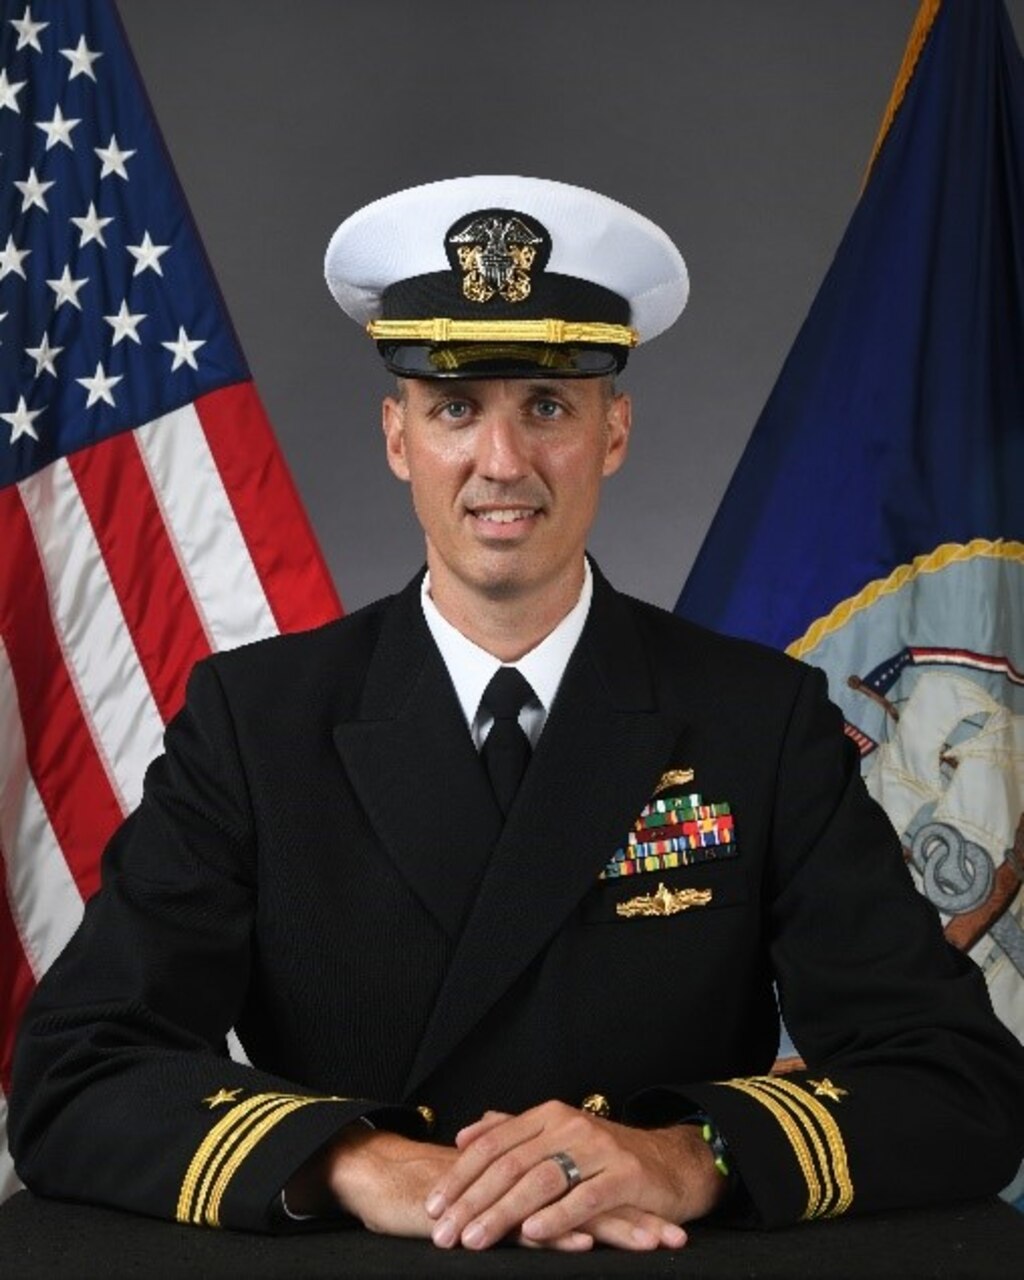 Lt. Cmdr. William “Billy” Tubbs, Executive Officer,
Naval Communications Security Material System (NCMS)